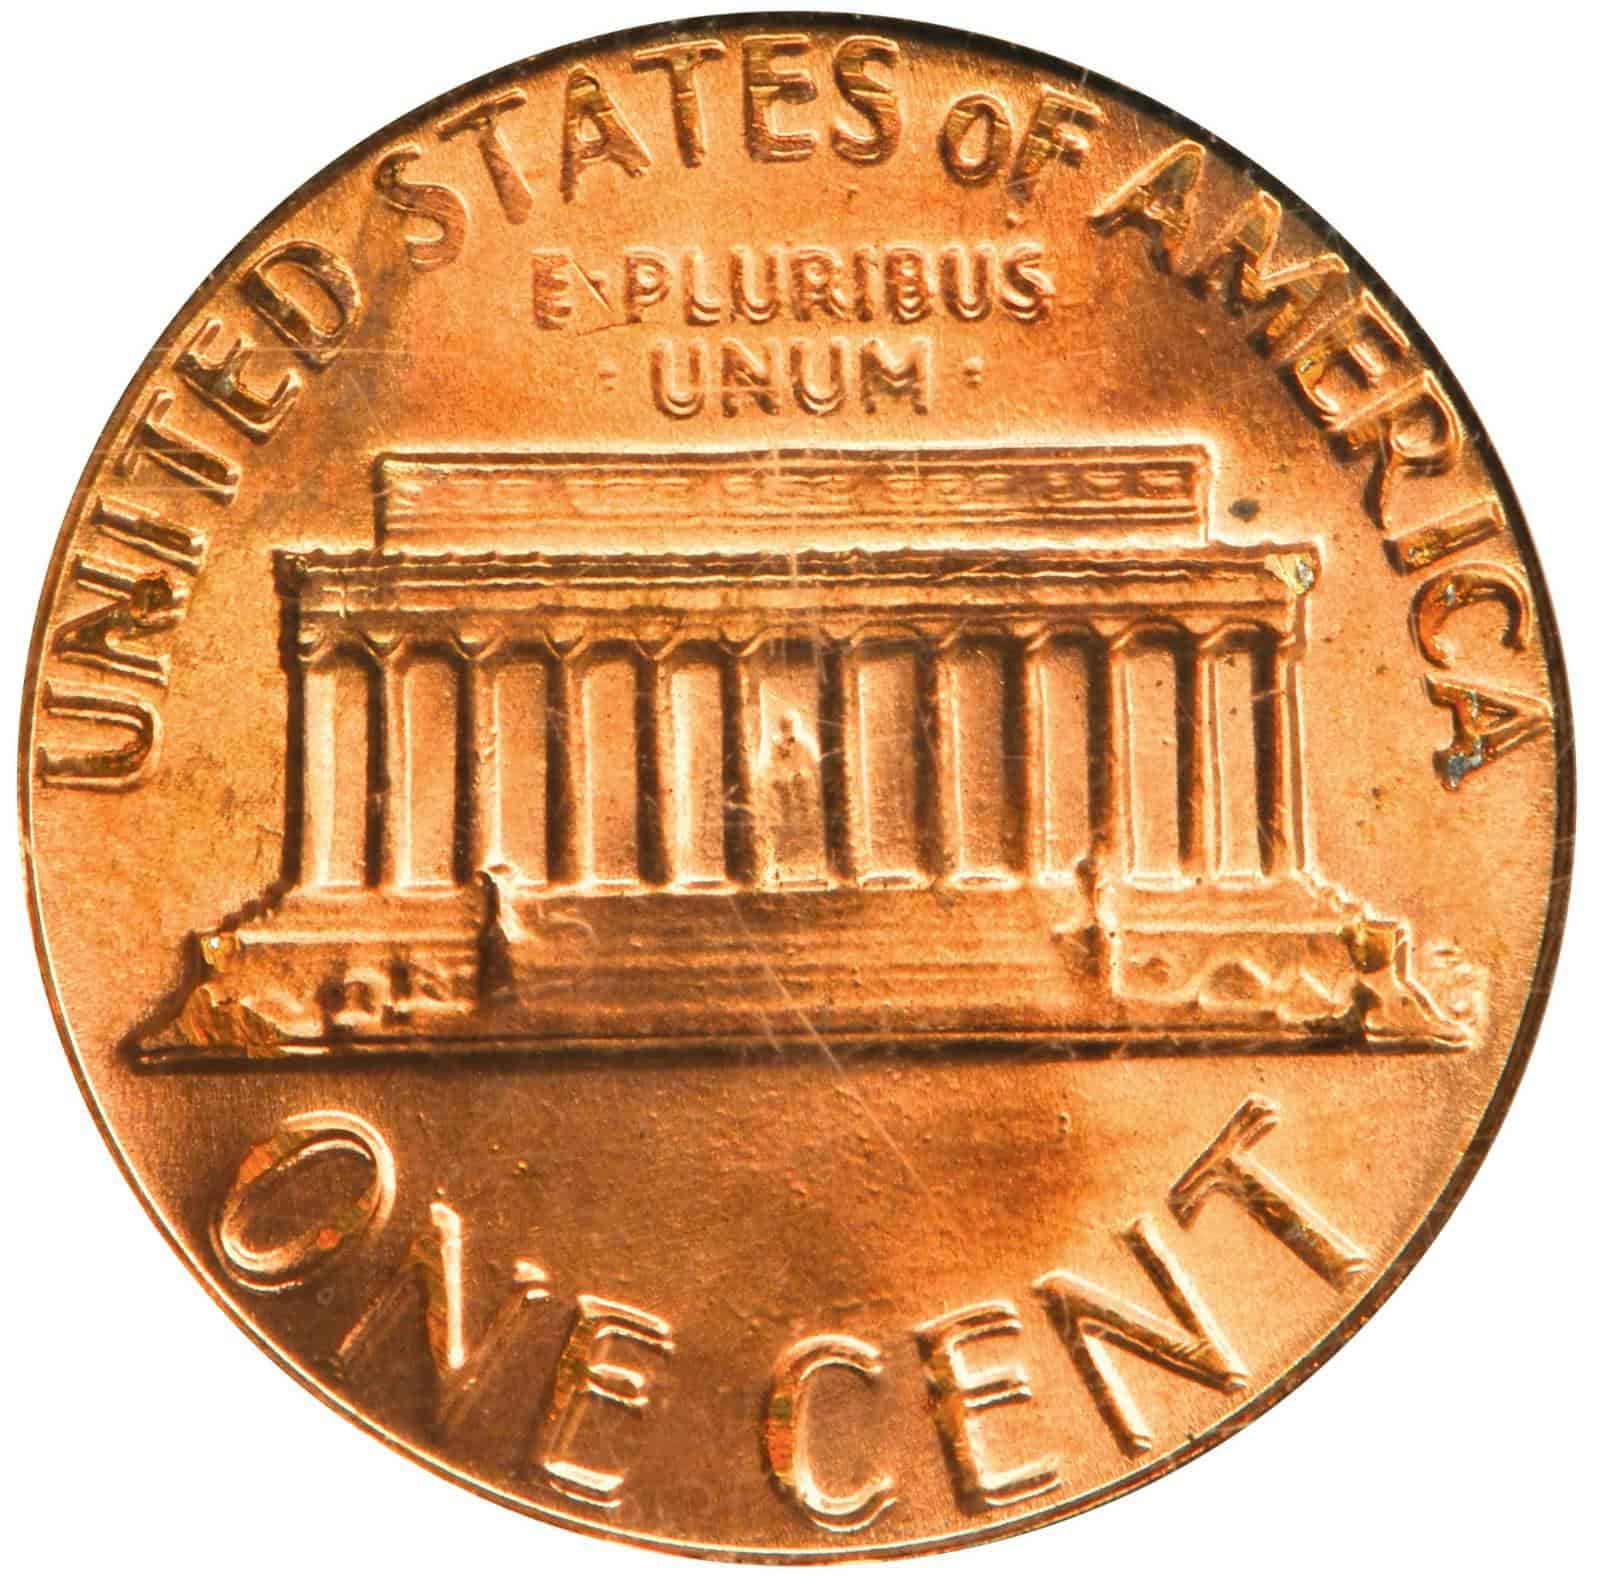 The Reverse of the 1983 Penny